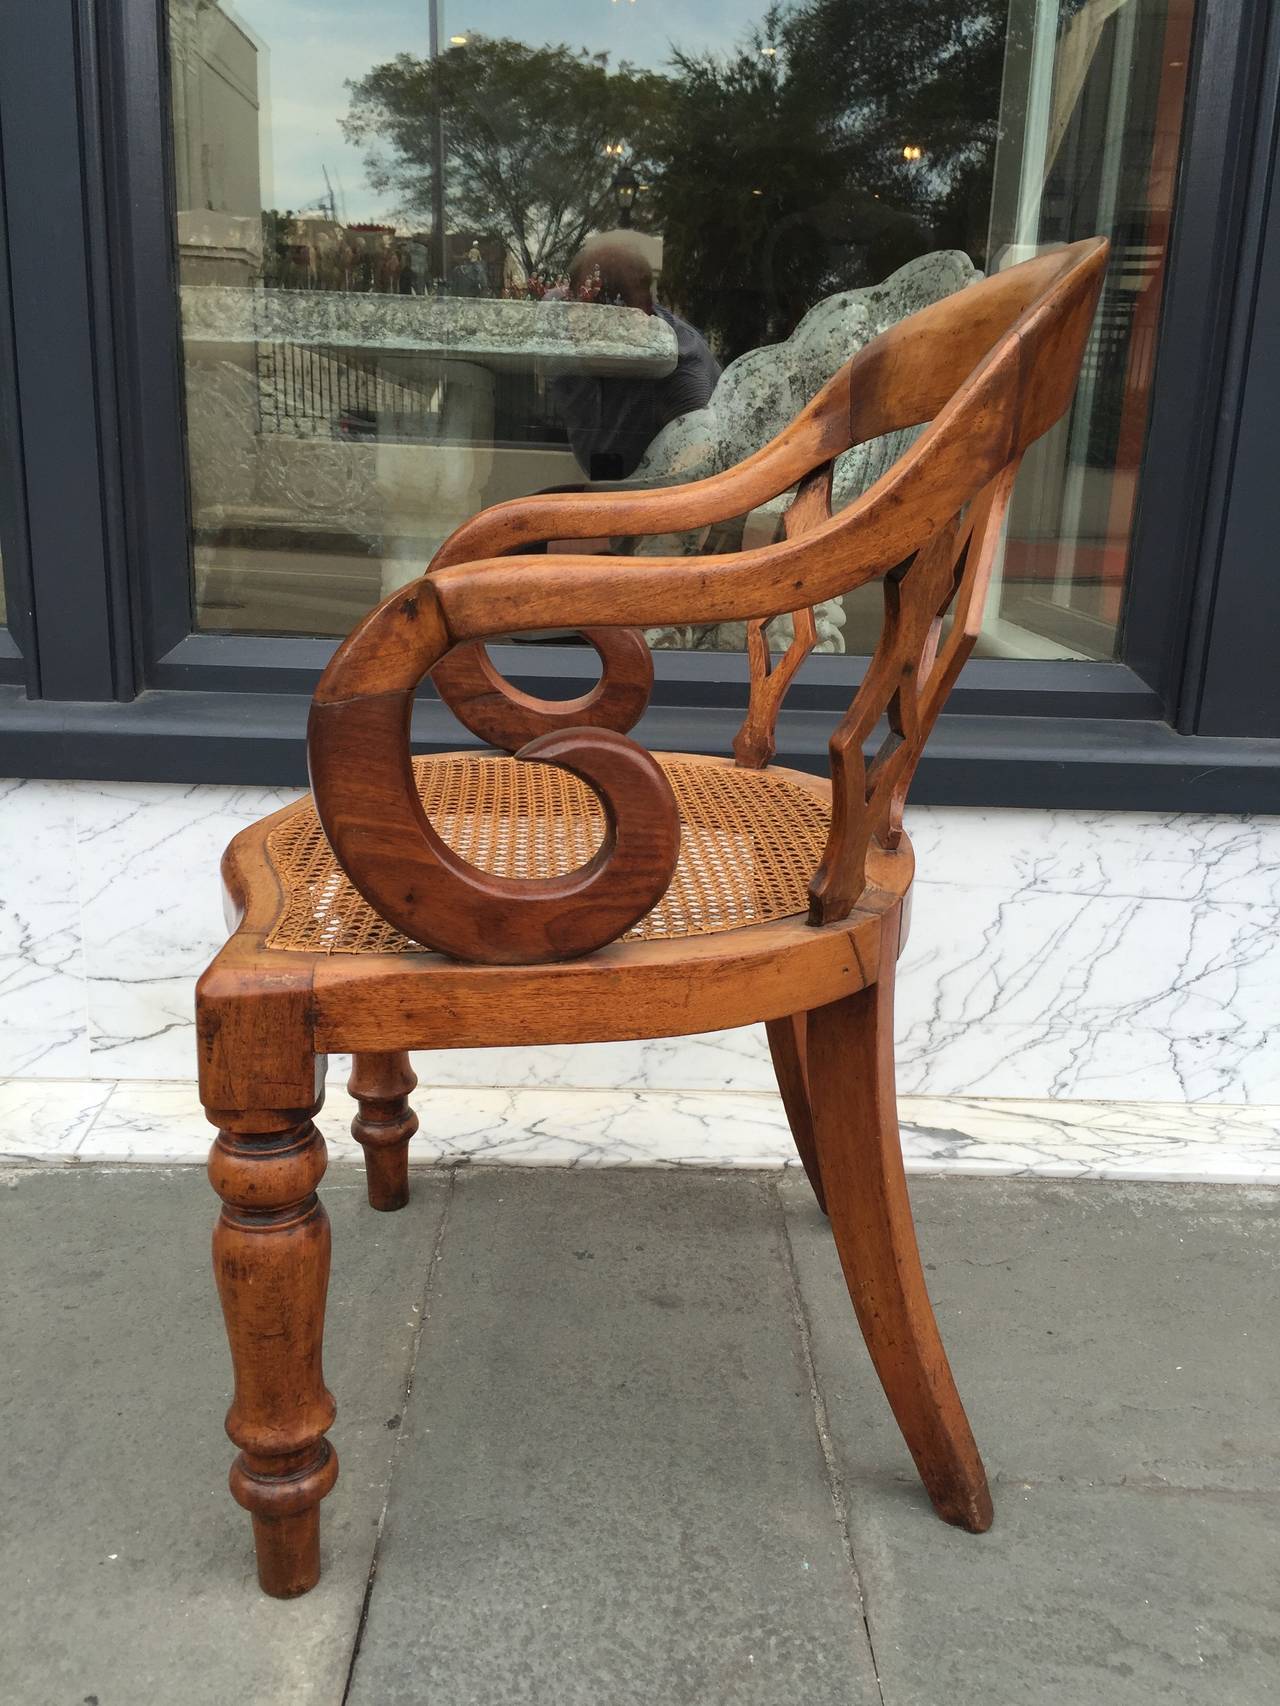 English walnut arm chair with cane seat bottom and turned legs